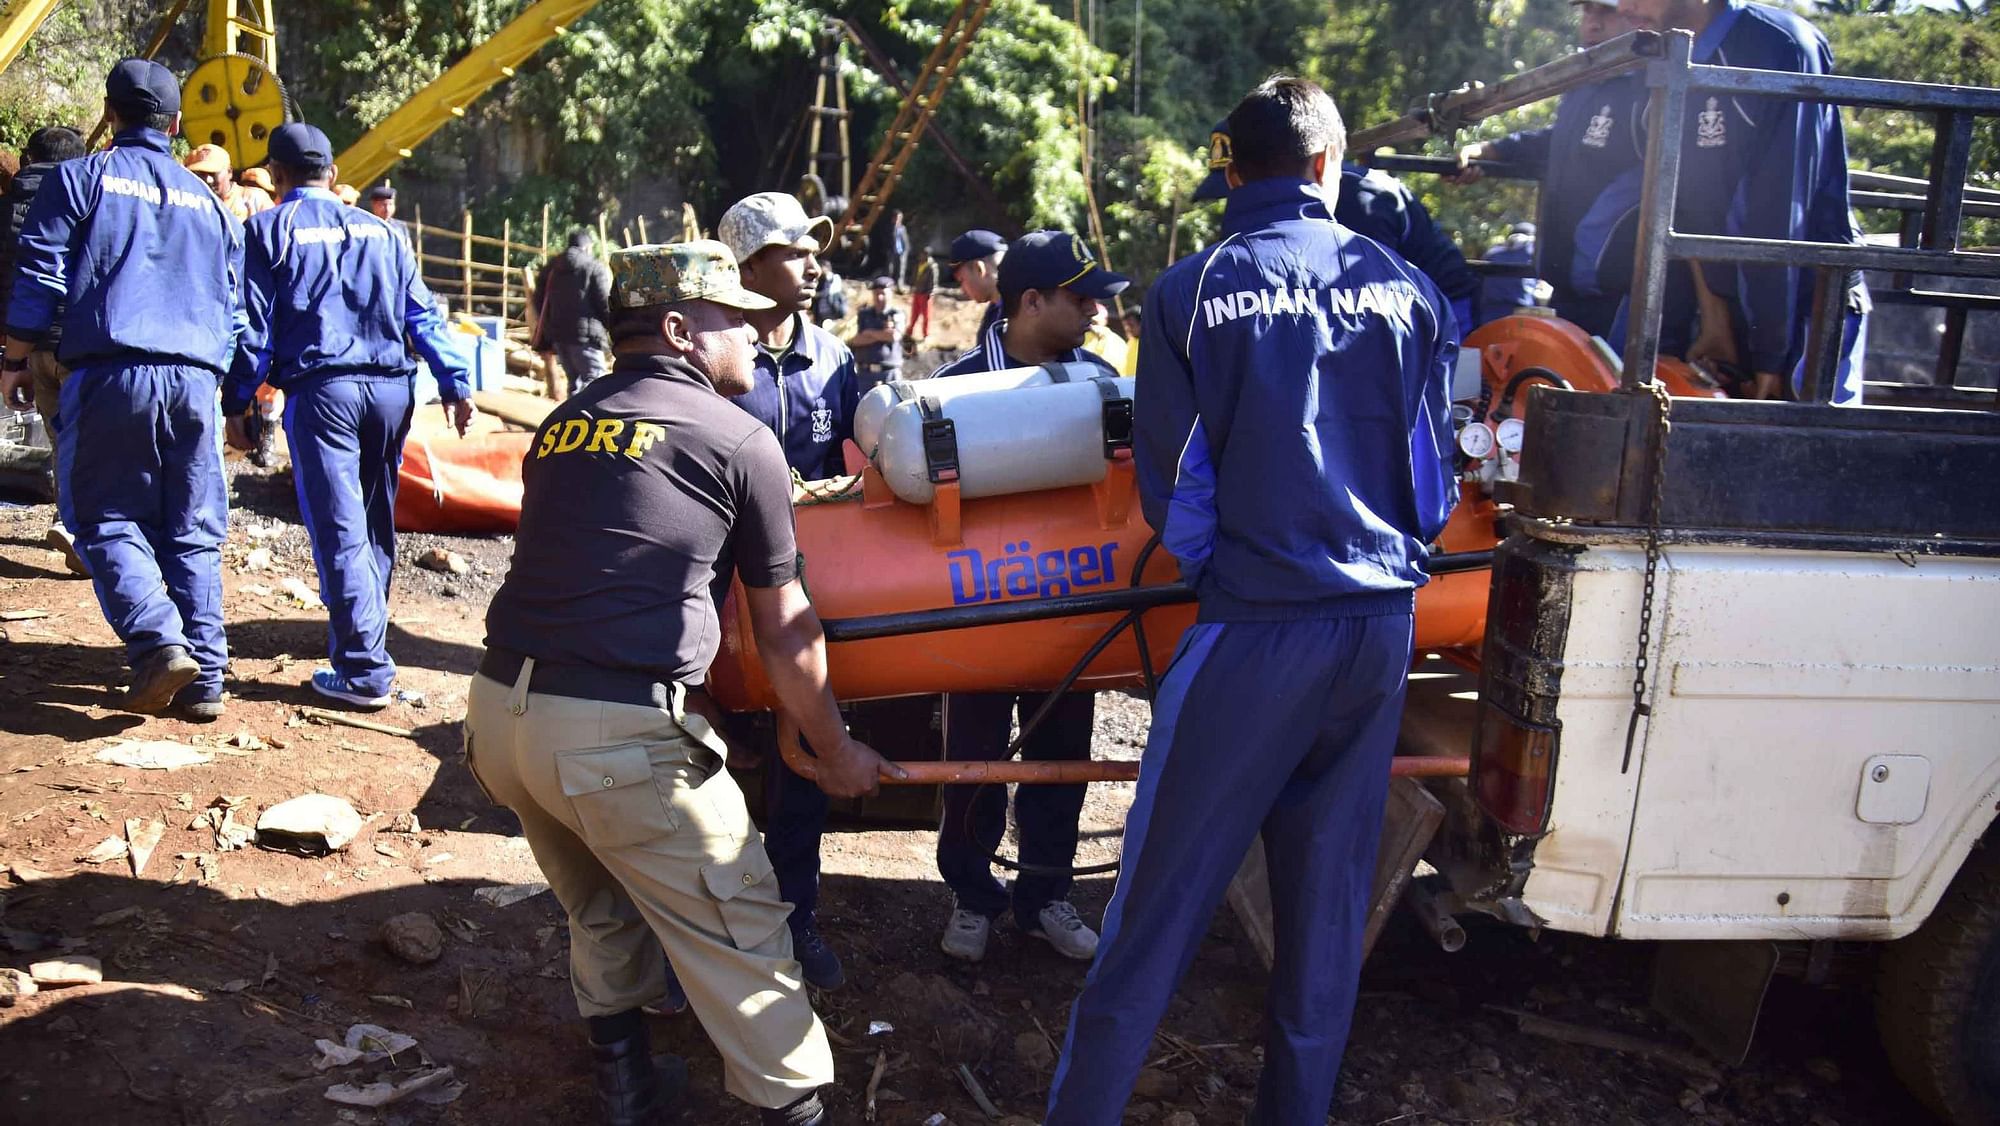 A team of 11 Navy divers with their equipments deployed to conduct rescue task at the site of a coal mine collapse at Ksan, in Jaintia Hills district of Meghalaya, Sunday, 30 December.